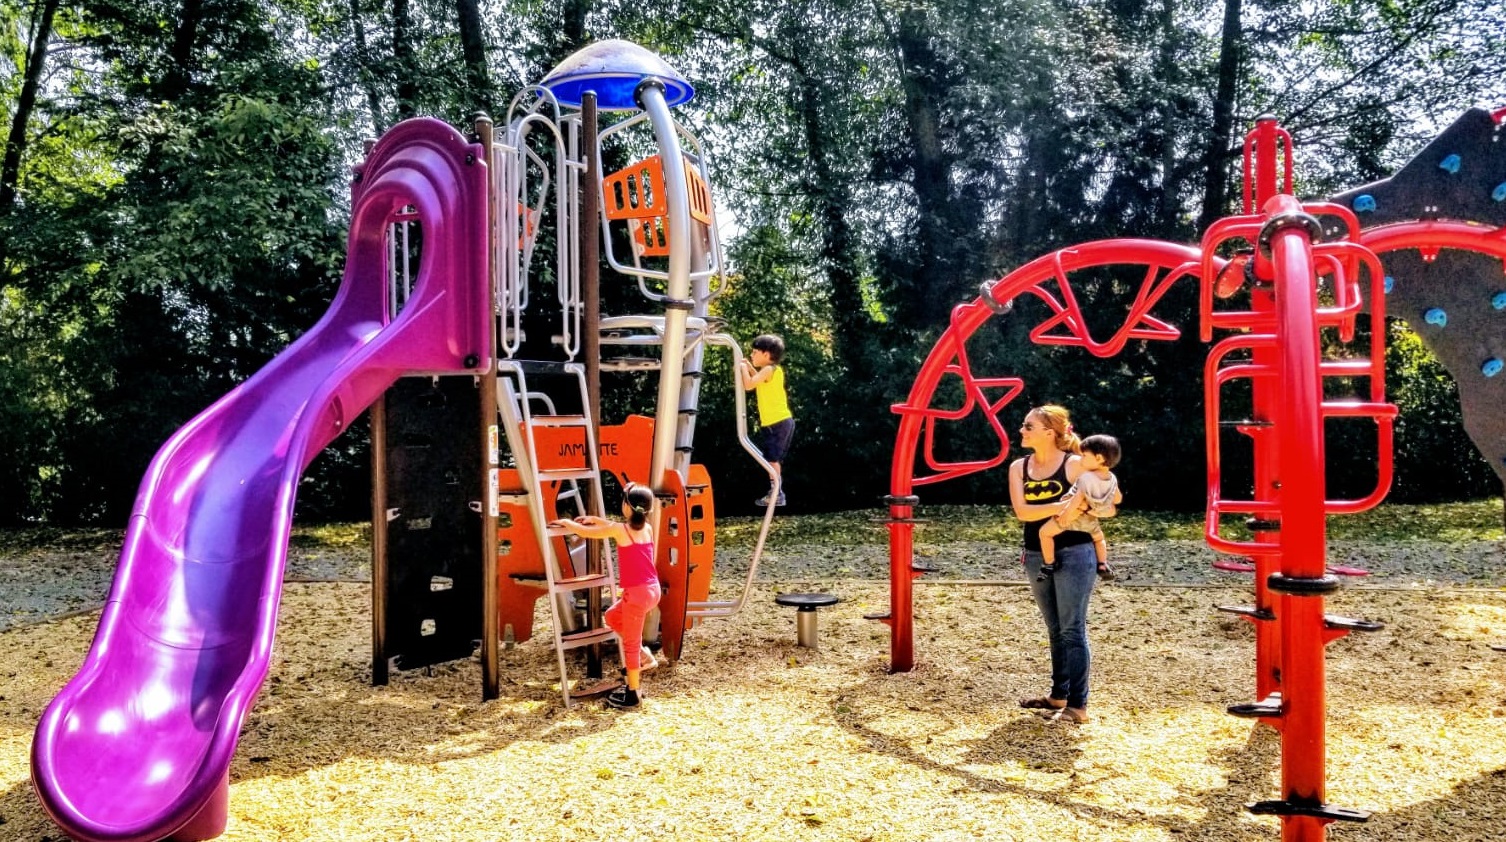 Five mental and creative benefits that playgrounds offer for children